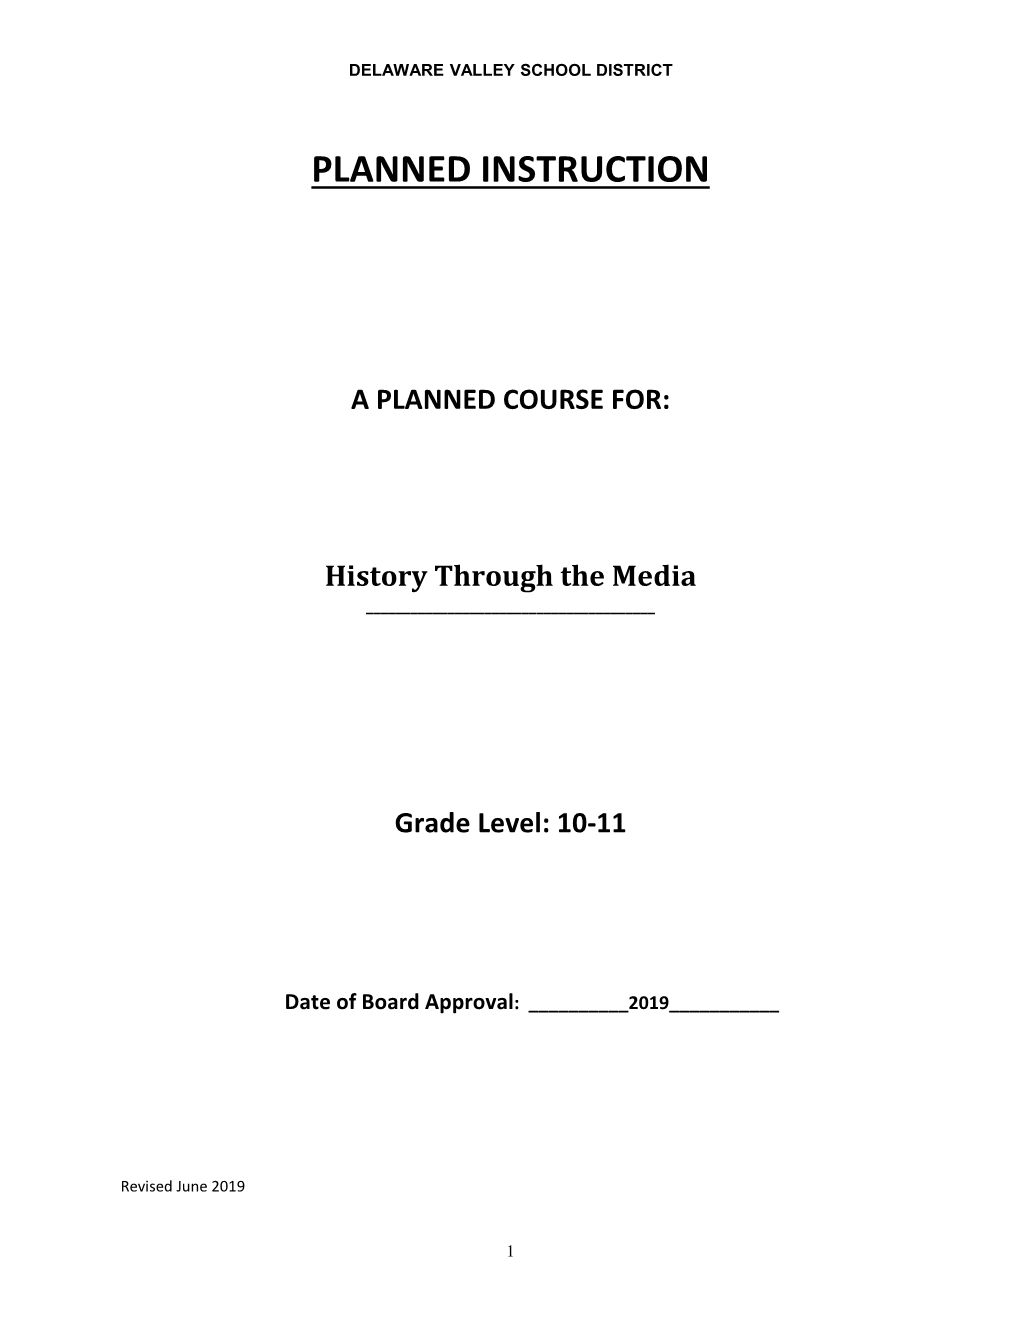 Planned Instruction